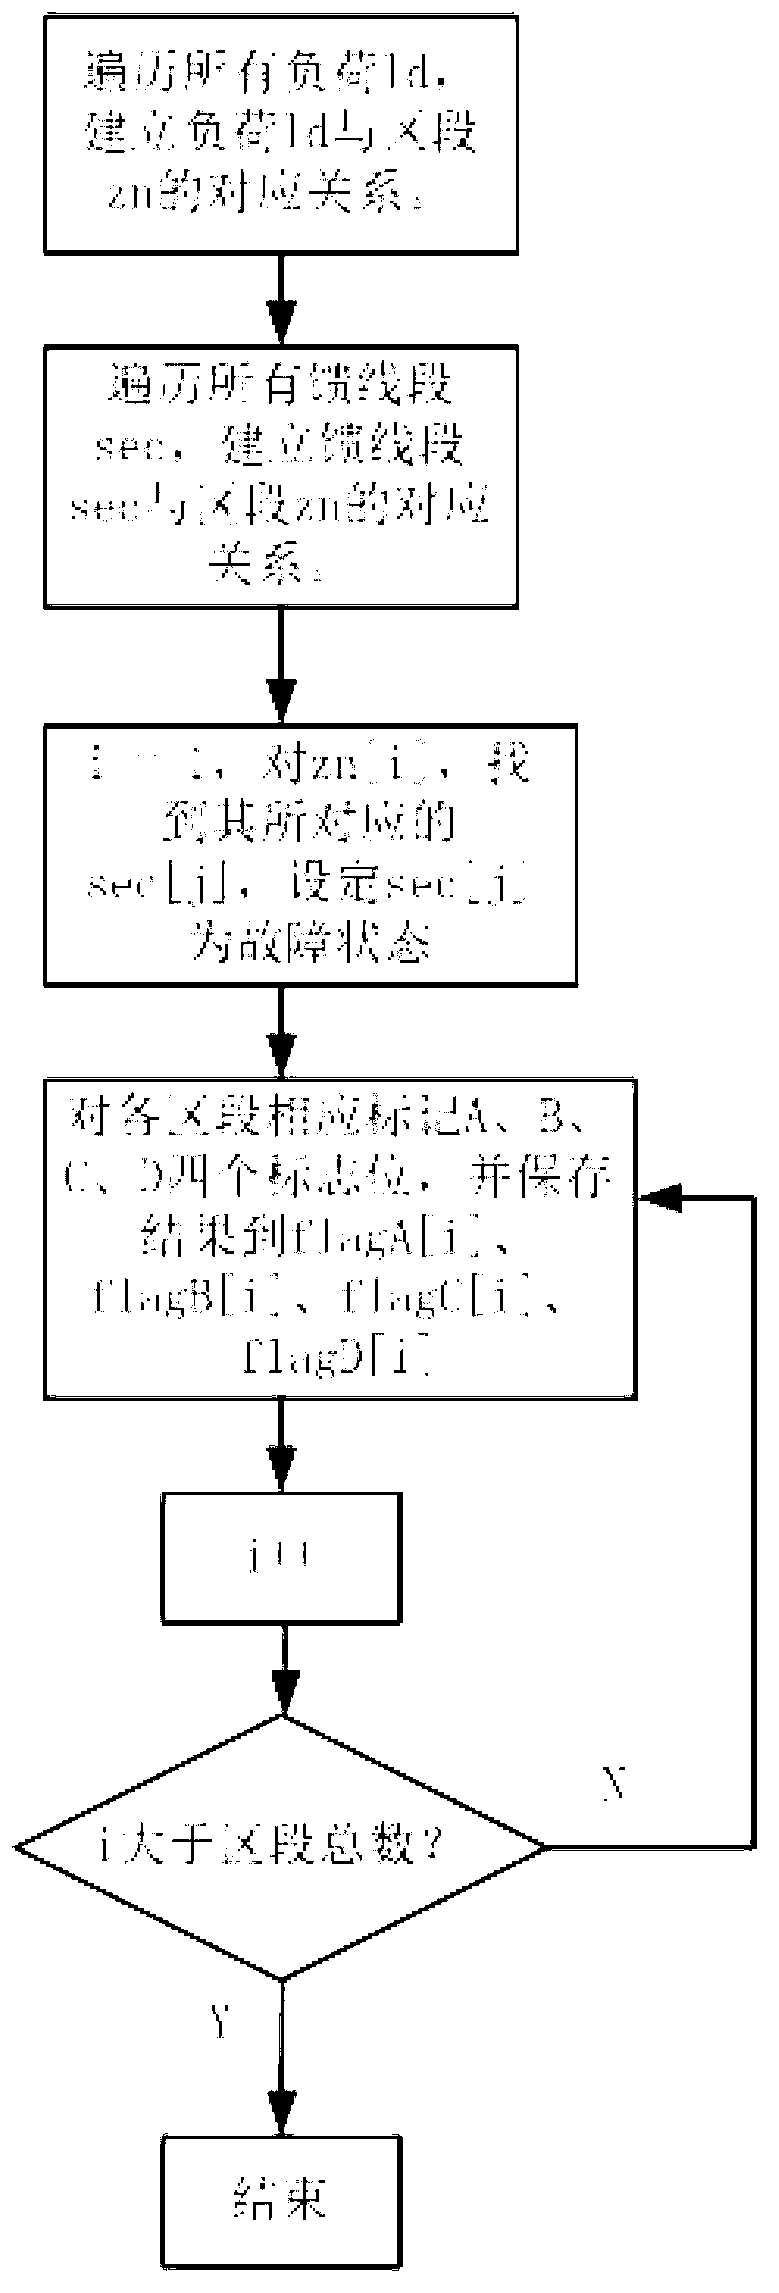 Power distribution network reliability assessment state labeling method based on segments